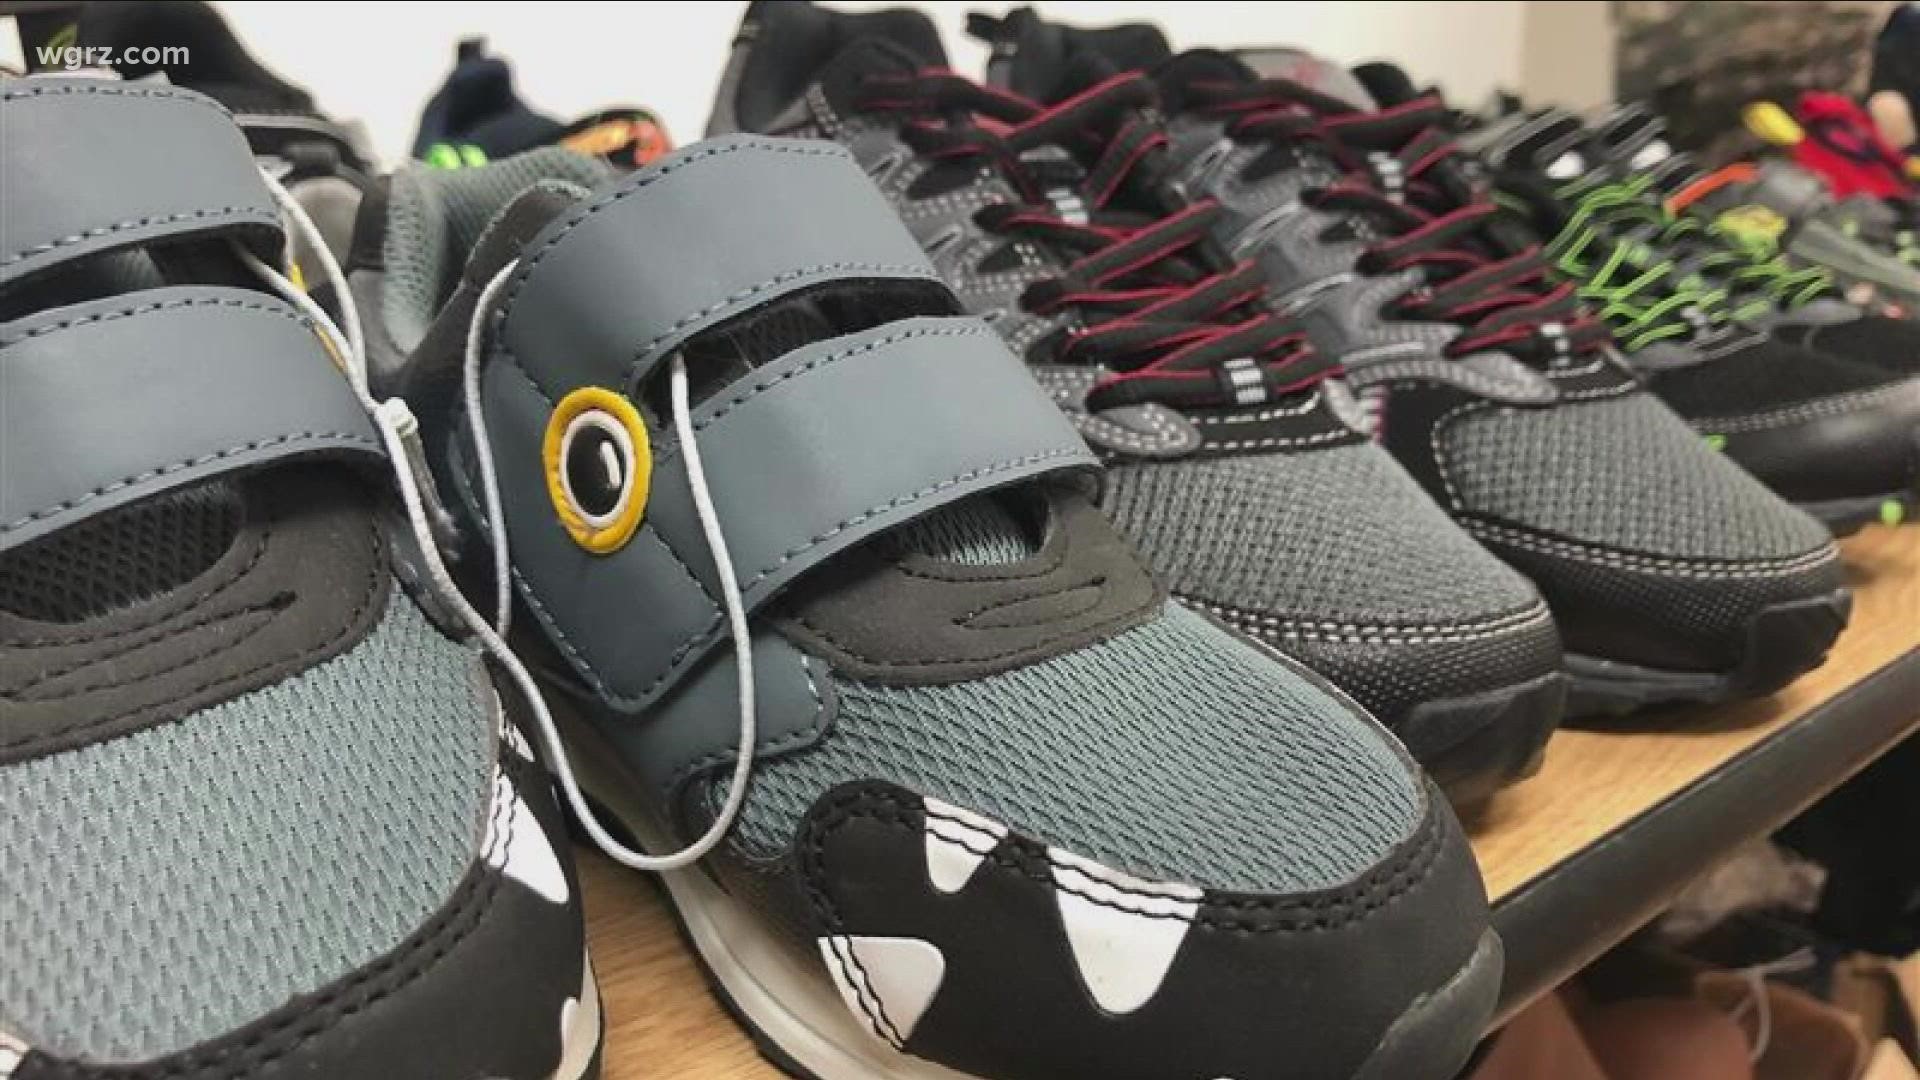 Pastor Tyrone Hall of Olean's Church Without Walls is once again organizing a new sneaker giveaway for kids in need in Olean and surrounding communities.